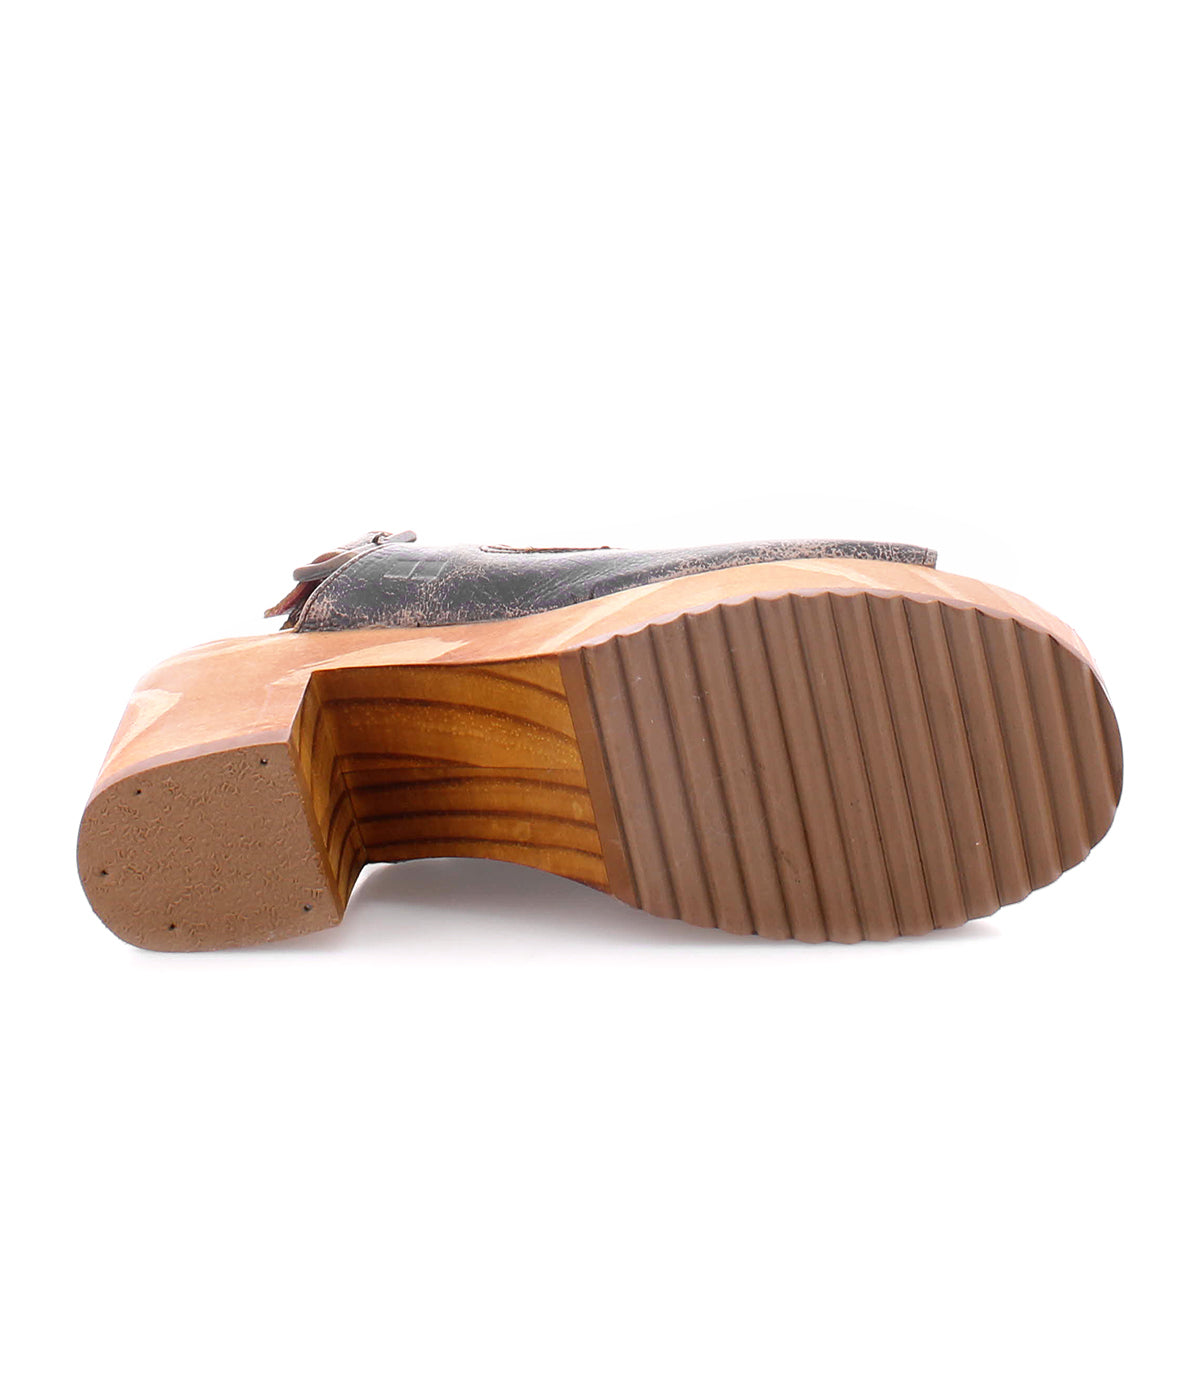 The back of a Jinkie shoe with a wooden sole and an adjustable ankle buckle. Brand Name: Bed Stu.